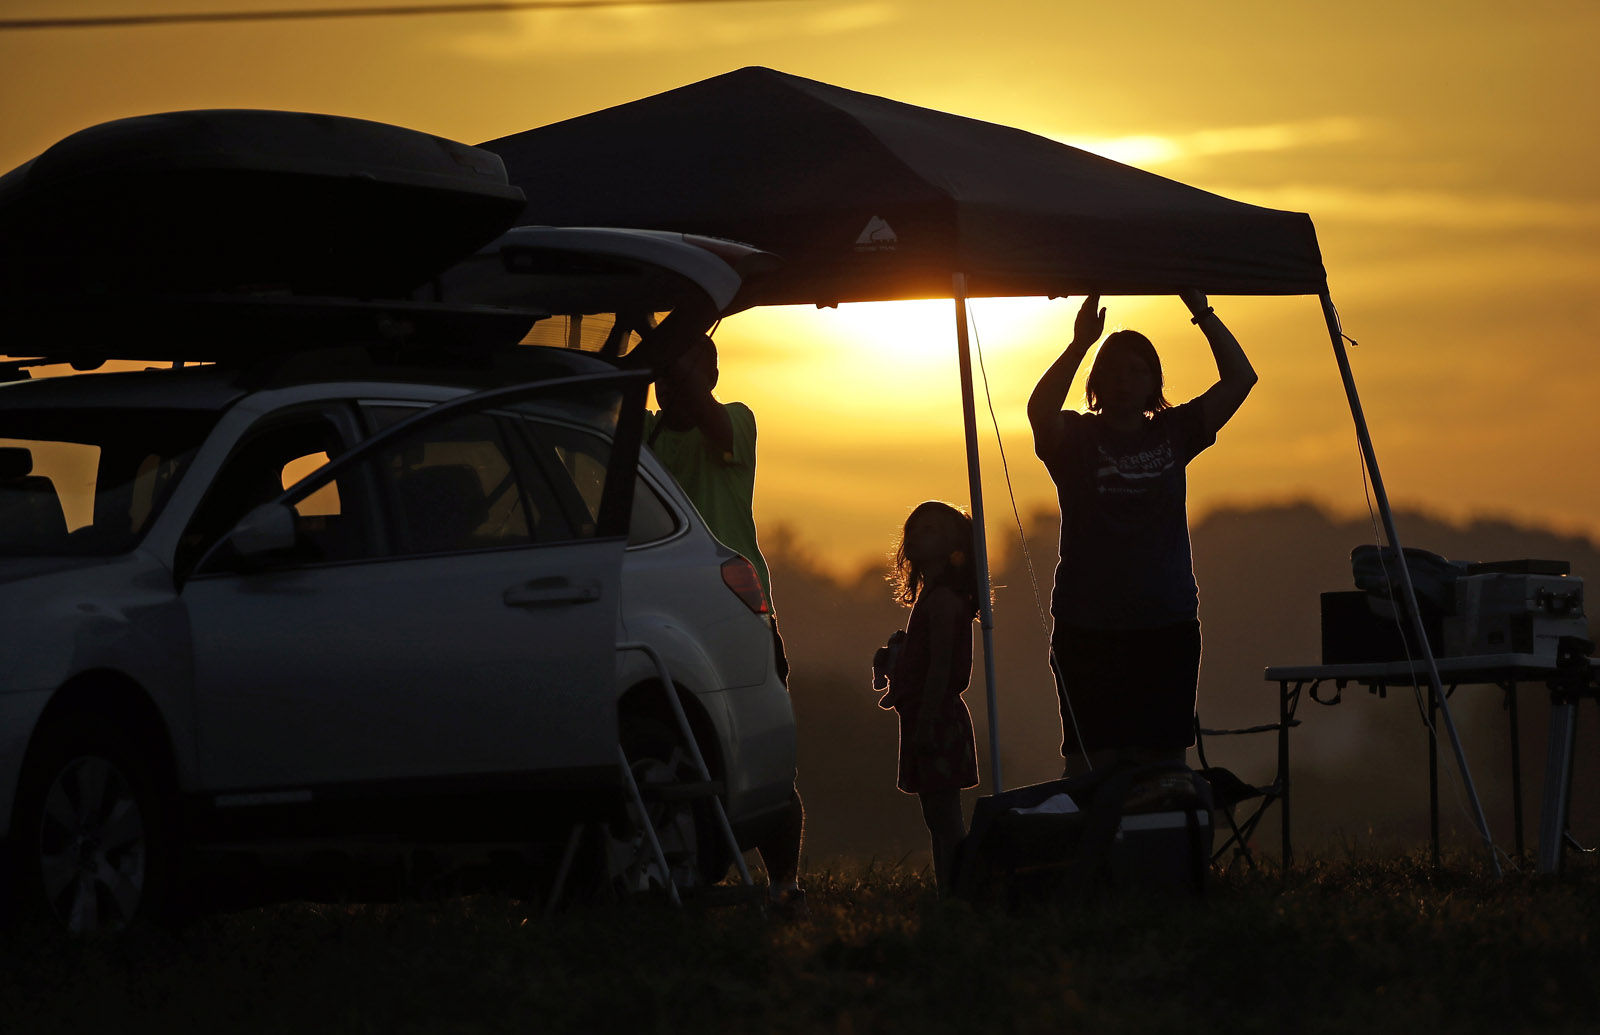 A family sets up a tent at their campsite at sunrise for the solar eclipse Monday, Aug. 21, 2017, on the Orchard Dale historical farm near Hopkinsville, Ky. The location, which is in the path of totality, is also at the point of greatest intensity. (AP Photo/Mark Humphrey)